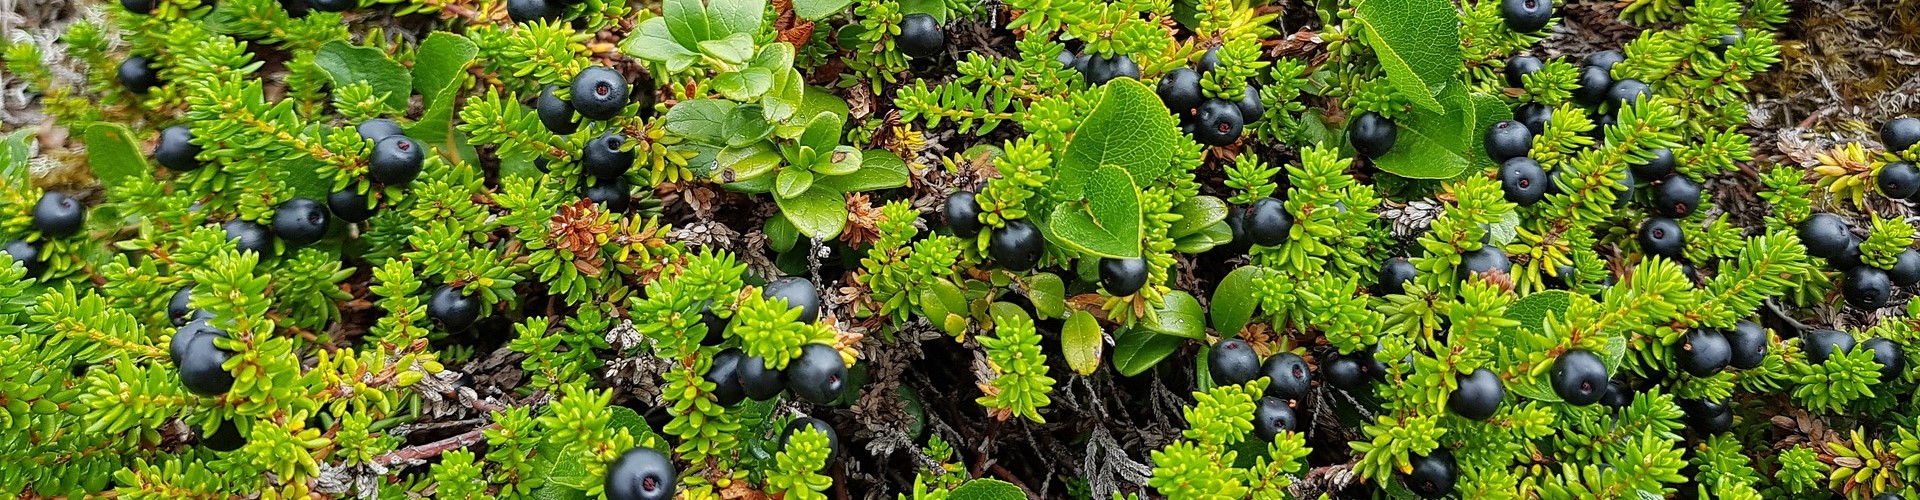 Photograph of green foliage and small, black crowberries